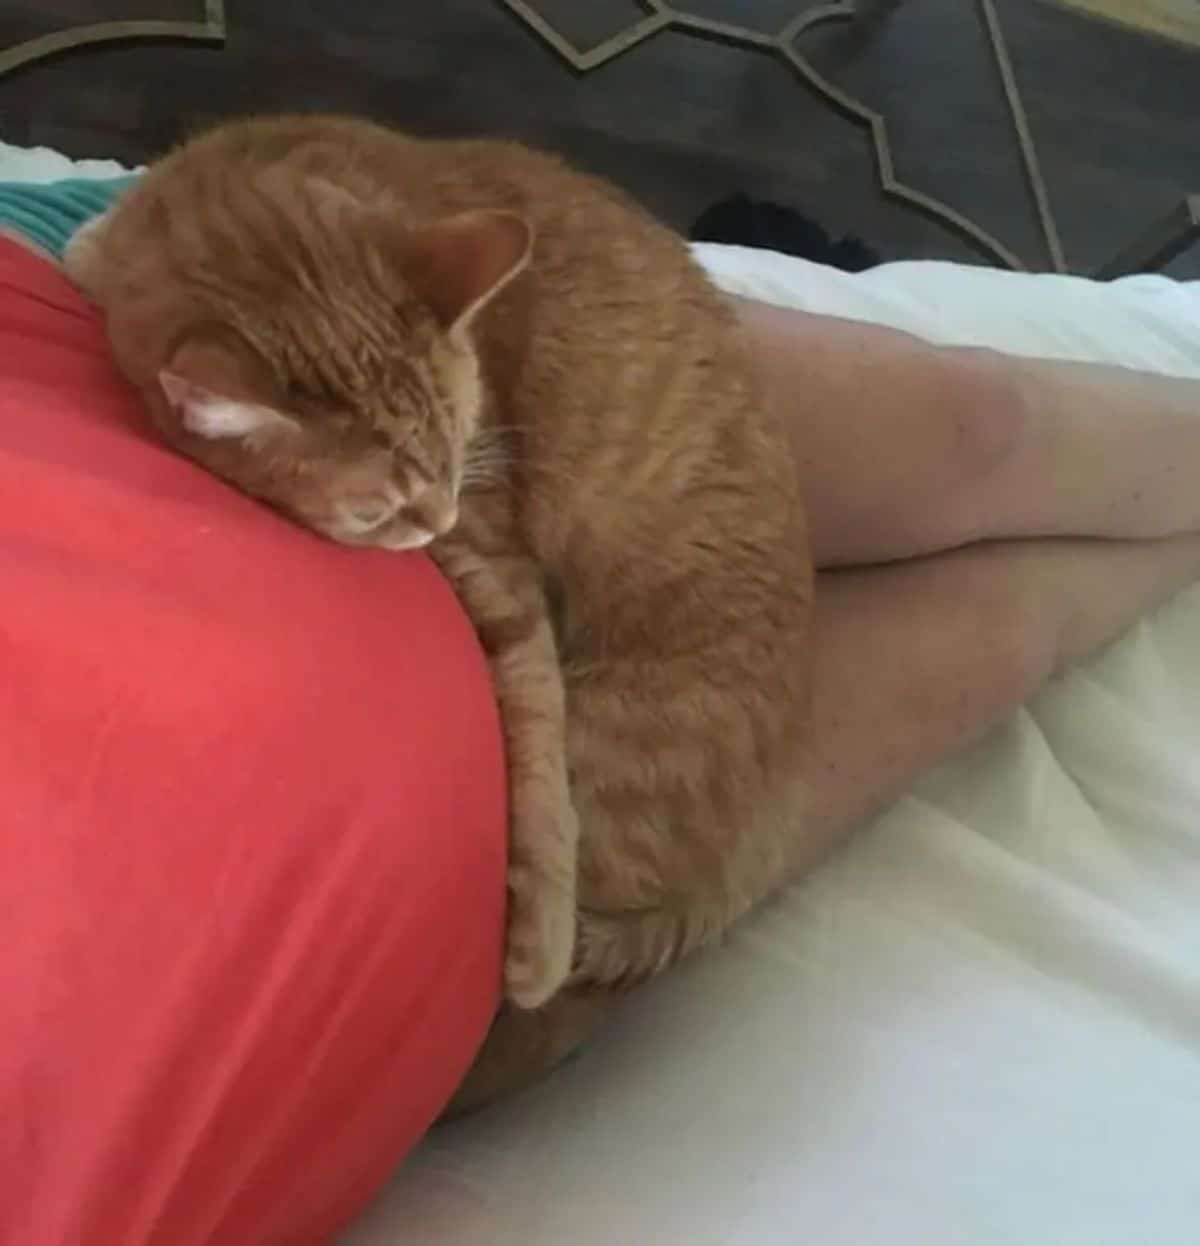 orange cat laying on and hugging a pregnant person's stomach